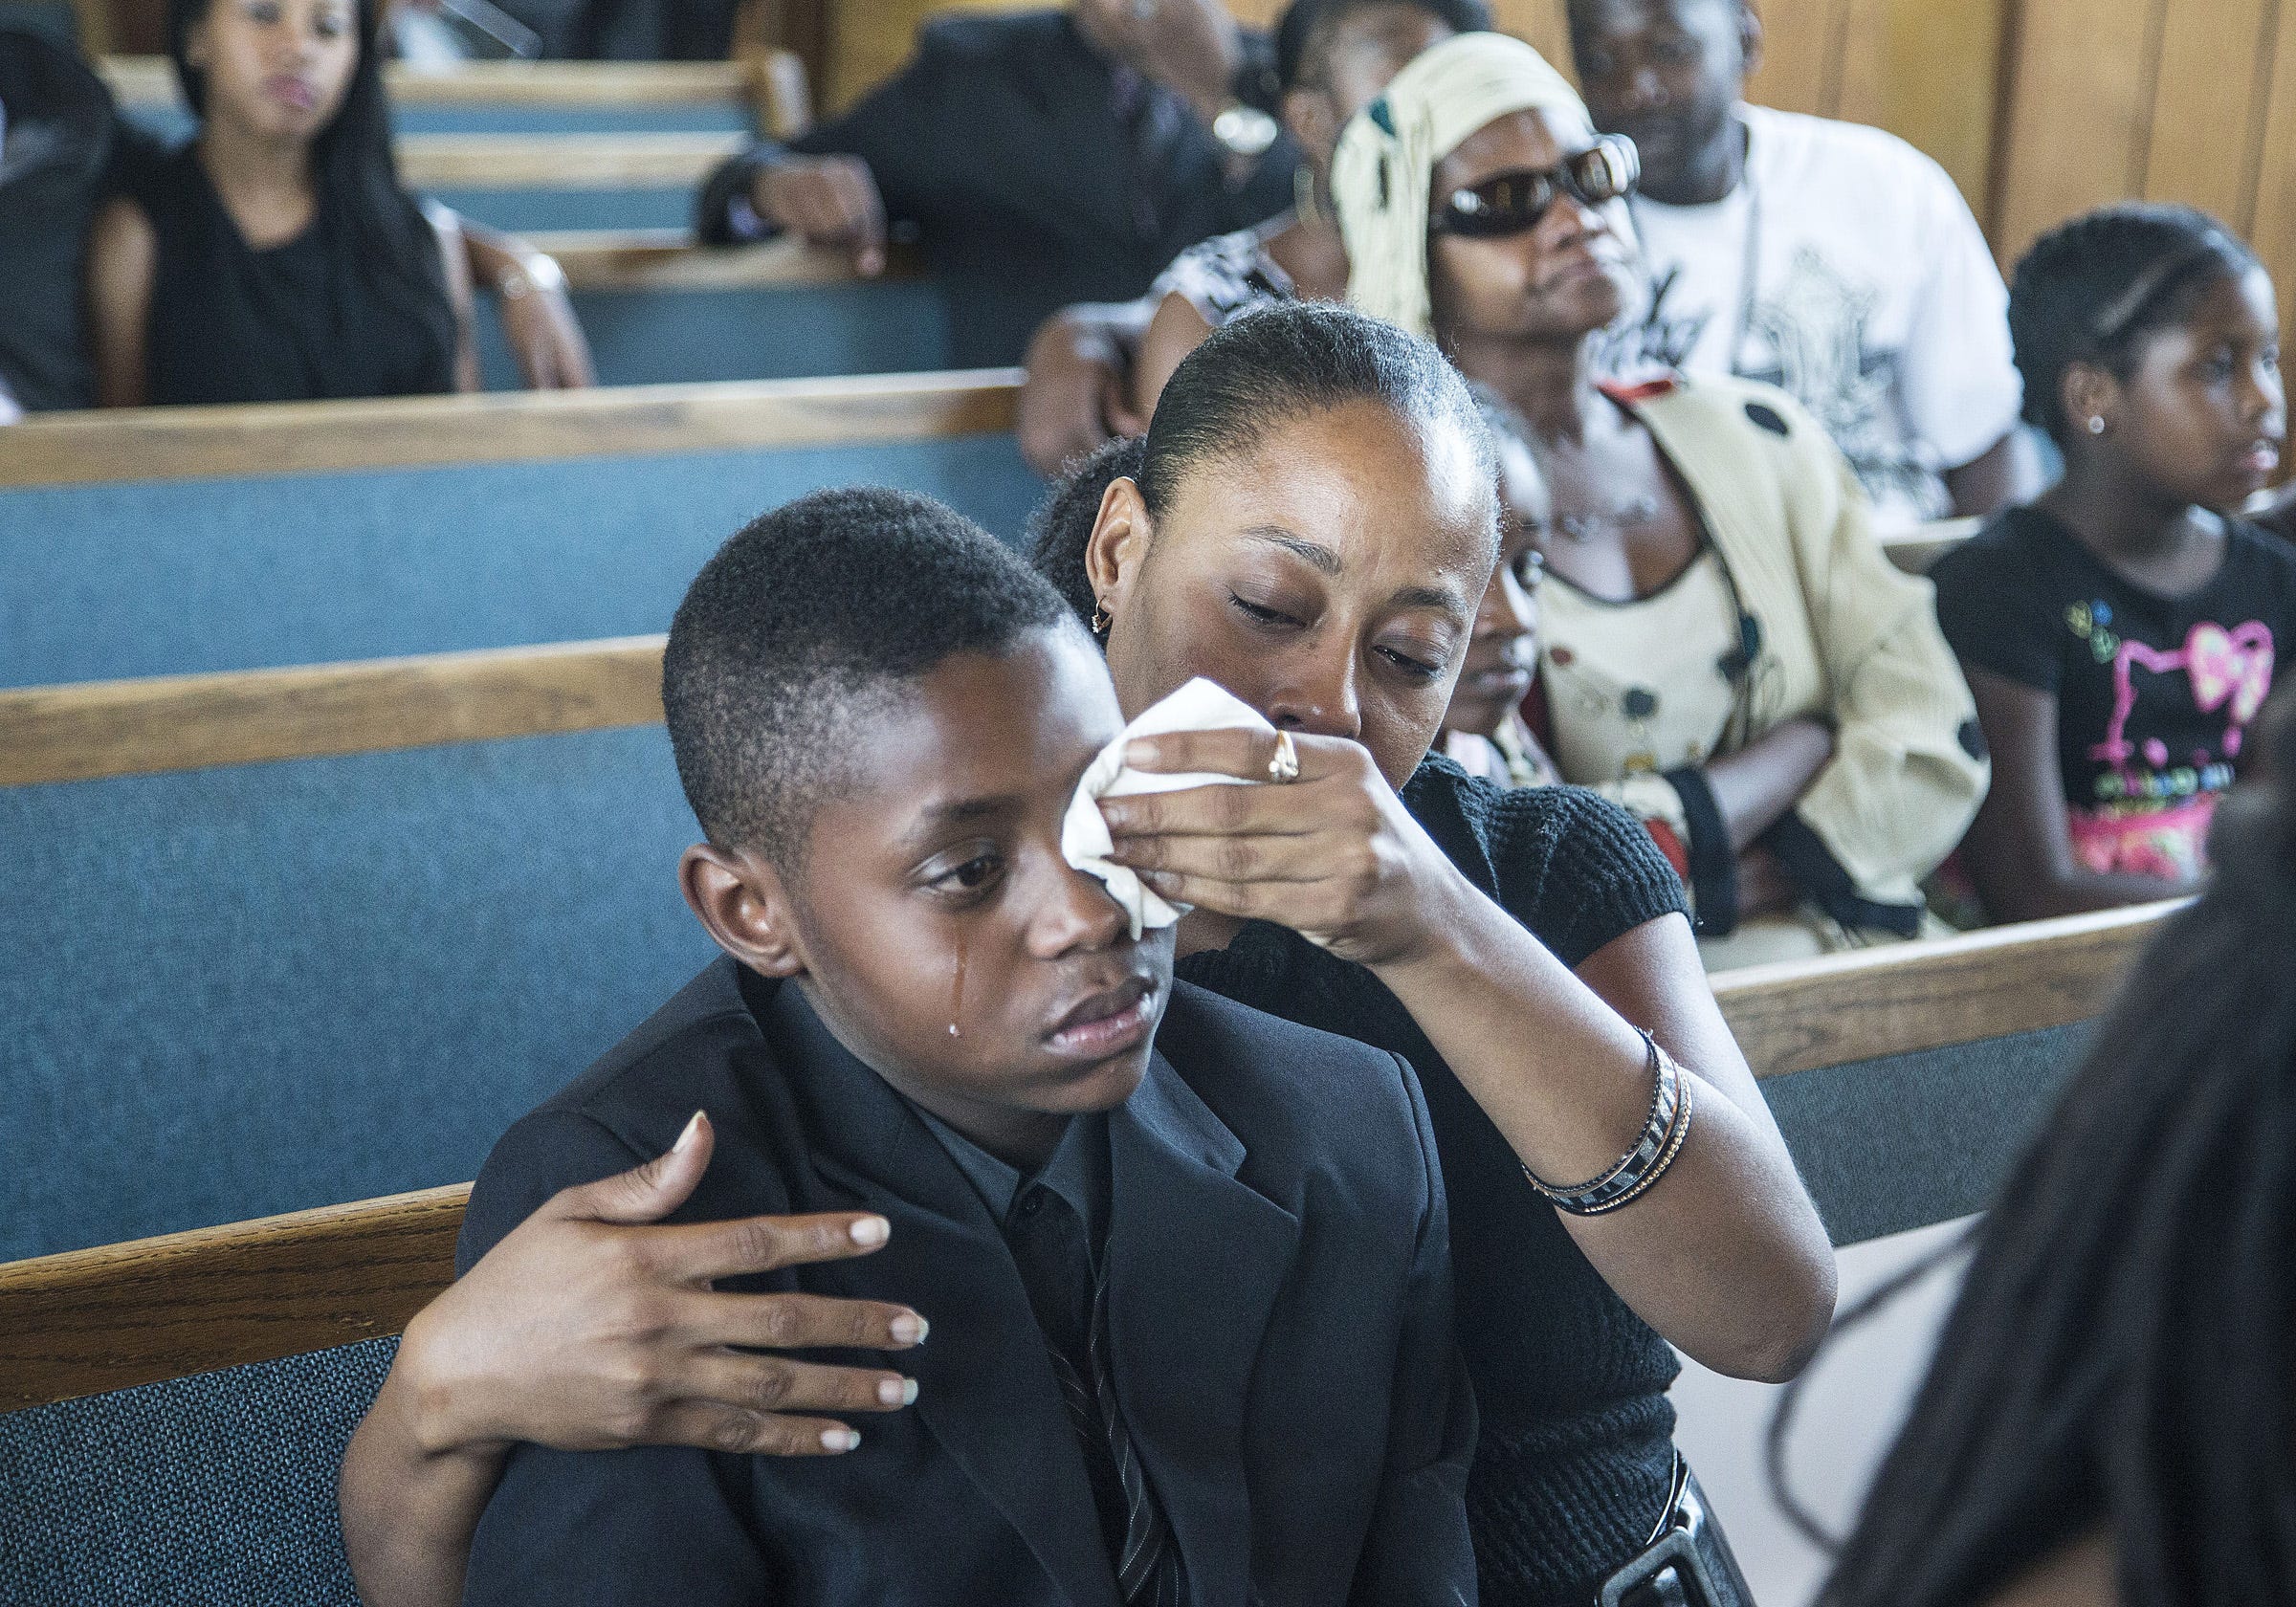 Sharon Lamb with her son Kasai Hayden, 10, extended family of deceased Michelle Cusseaux, mourns their loss during the funeral services at Emmanuel Church Of God In Christ in Phoenix, on August 23, 2014. Cusseaux was fatally shot by Phoenix police.